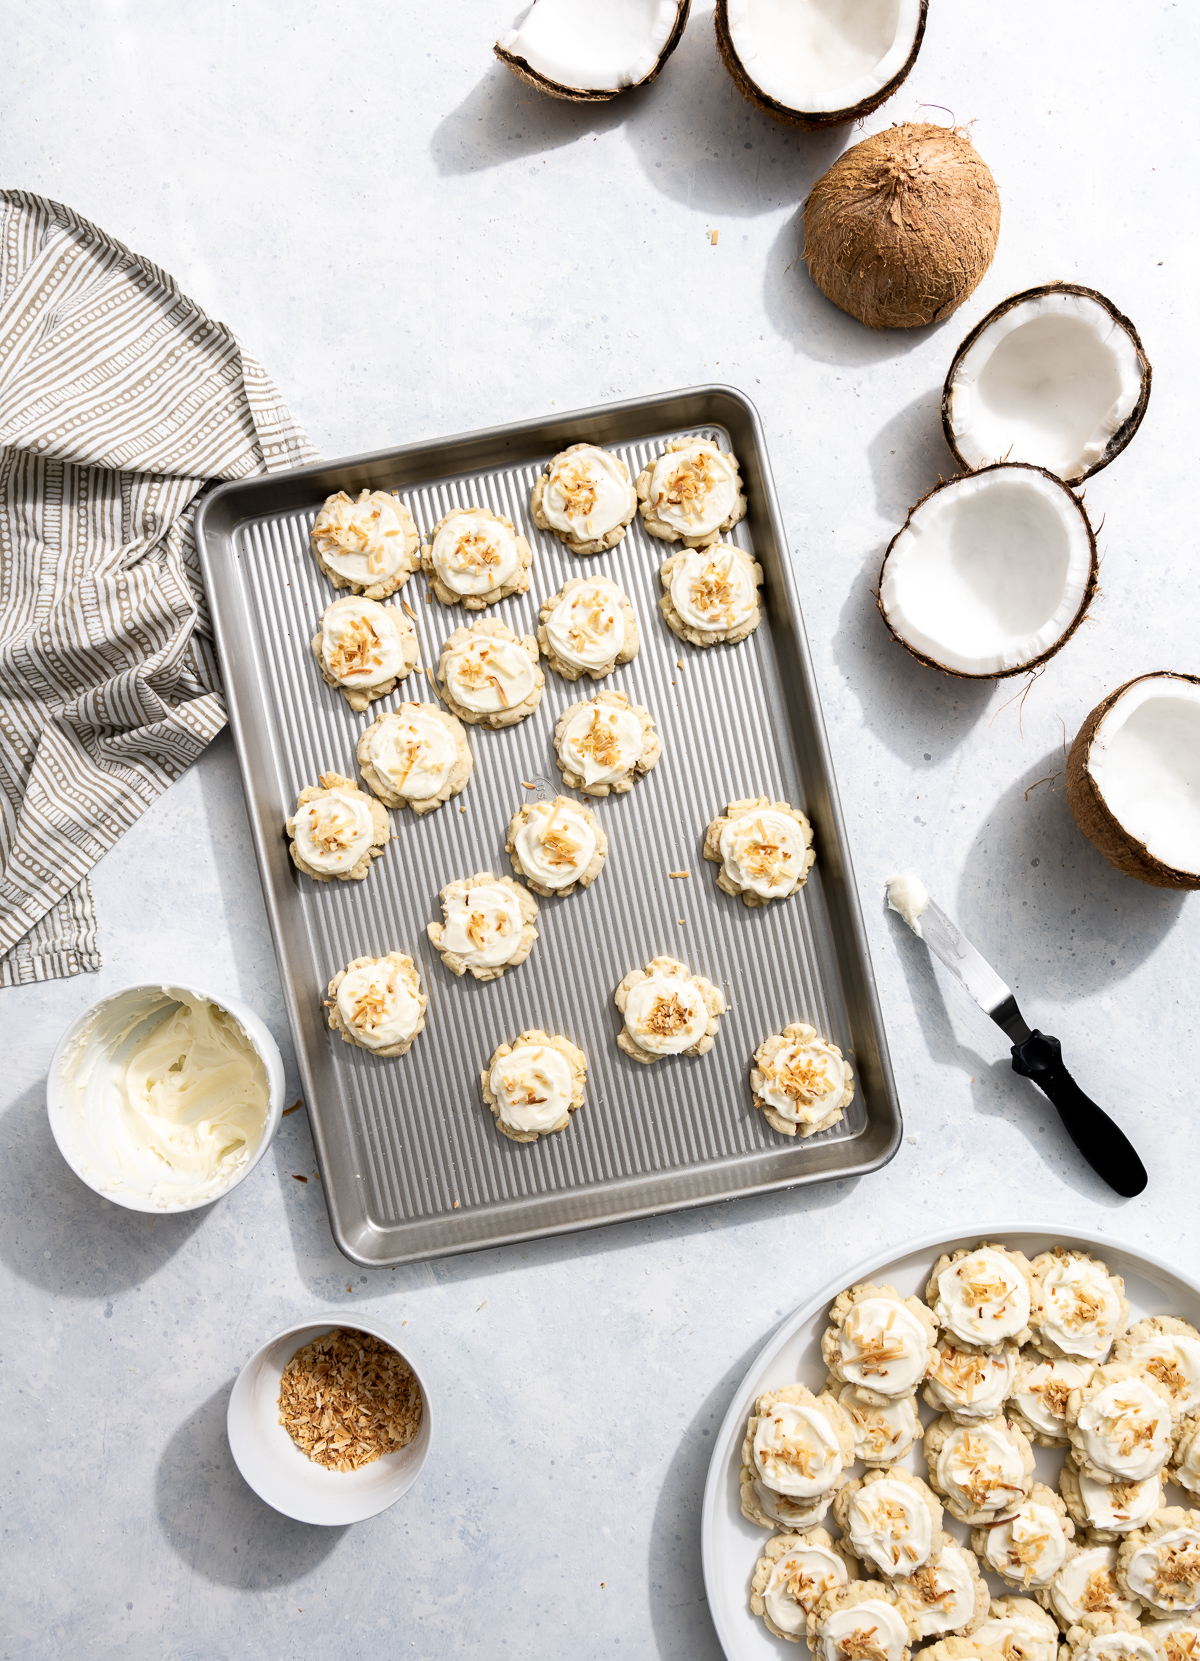 plate of coconut cookies bowl of coconut frosting bowl of toasted coconut fakes several cookies frosted spatula frosted cookies on a baking tray pieces of fresh coconut still in shell